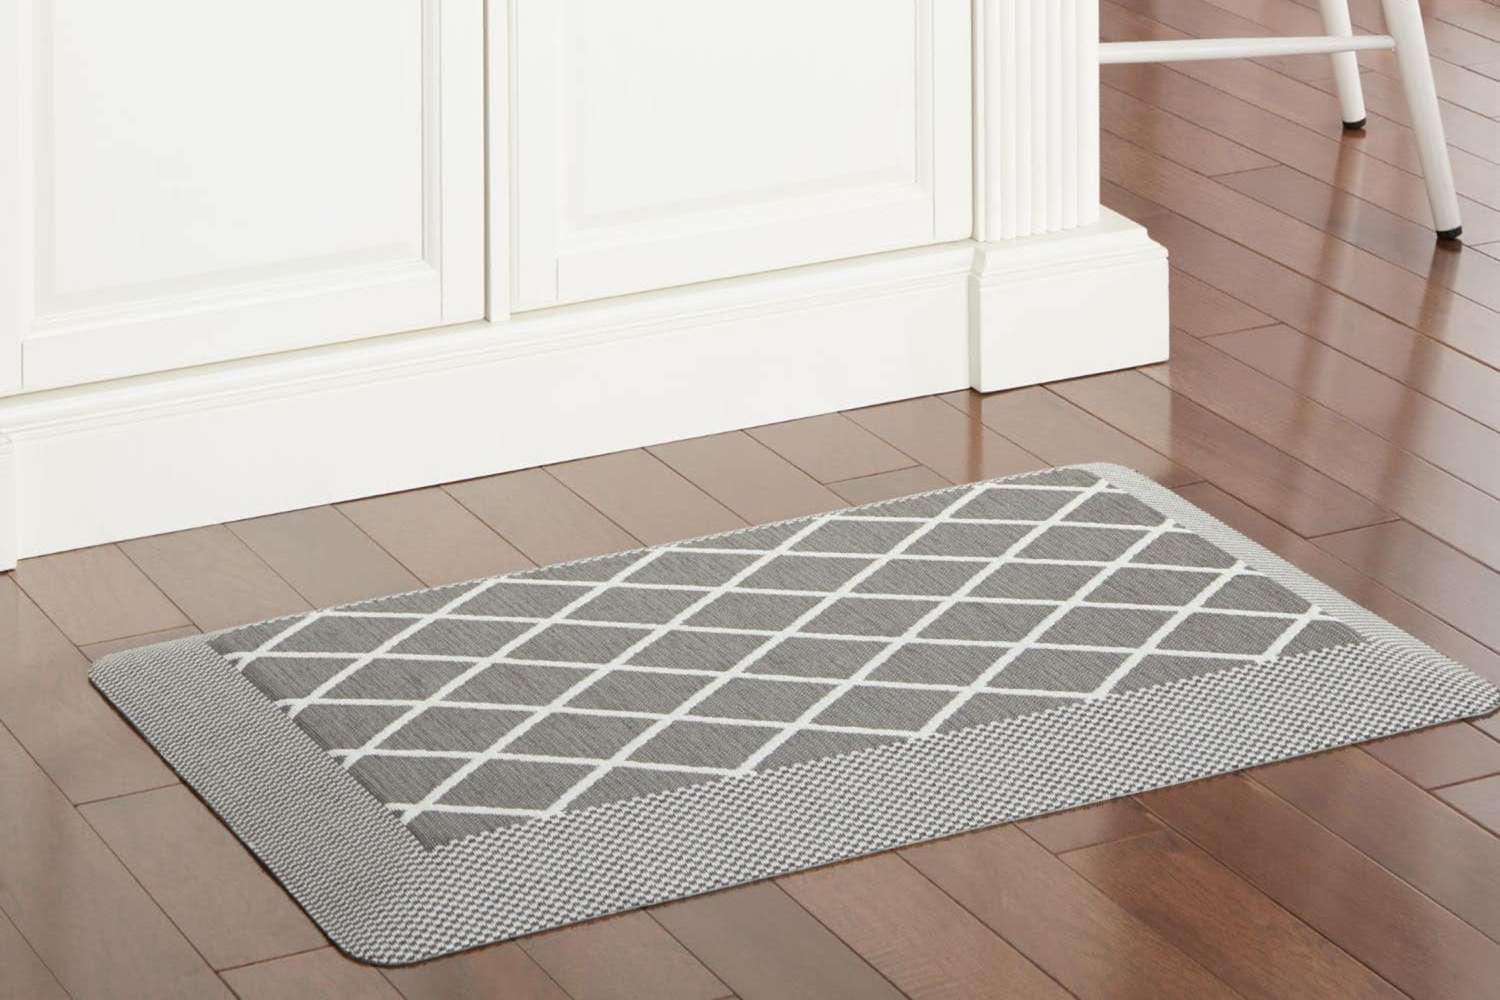 Shoppers Wish Their Whole Floor Was Covered With Martha Stewart’s Plush Kitchen Mat That’s Now 57% Off [Video]